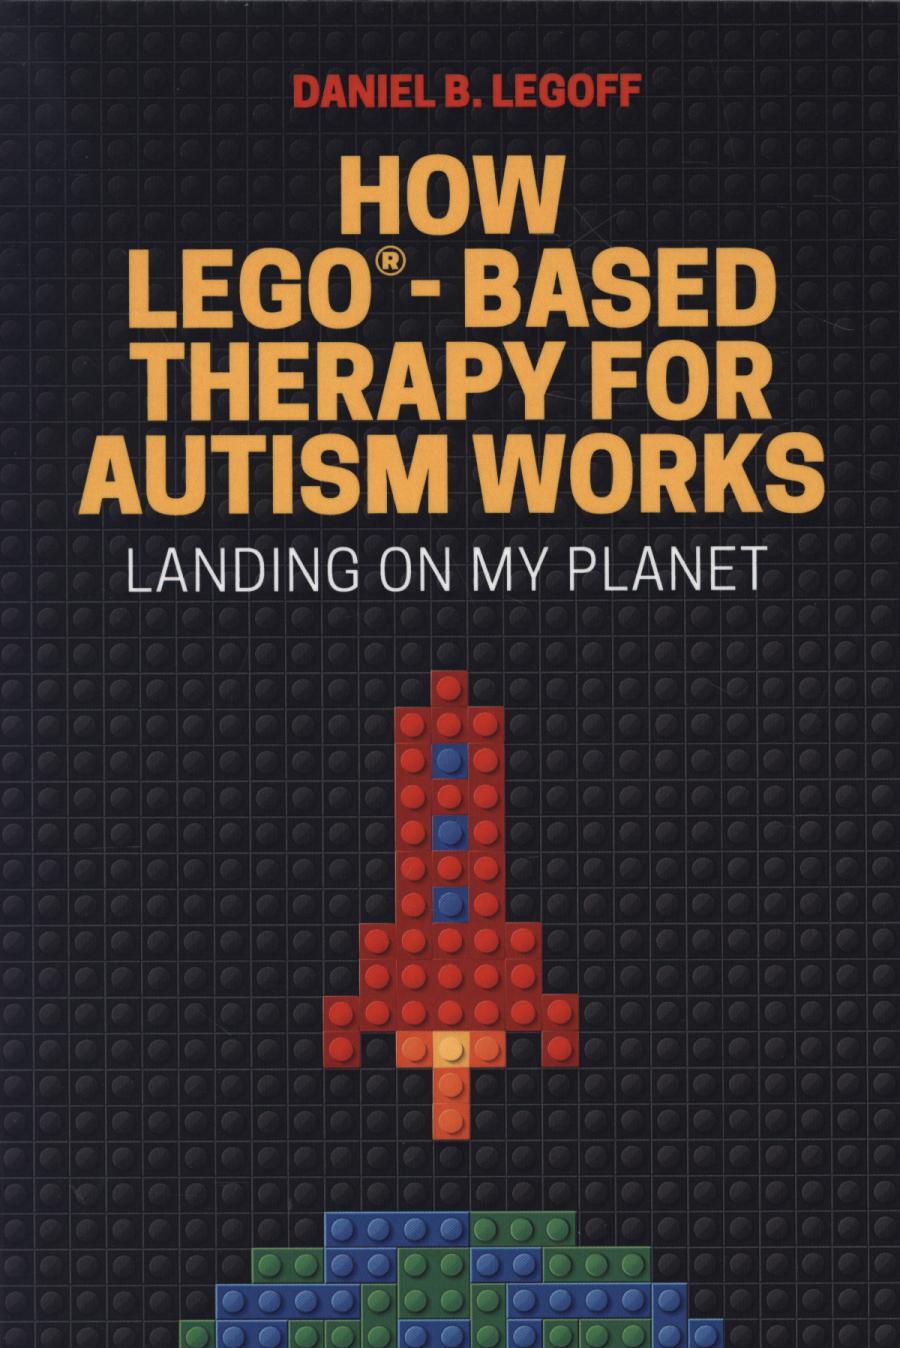 How LEGO (R)-Based Therapy for Autism Works